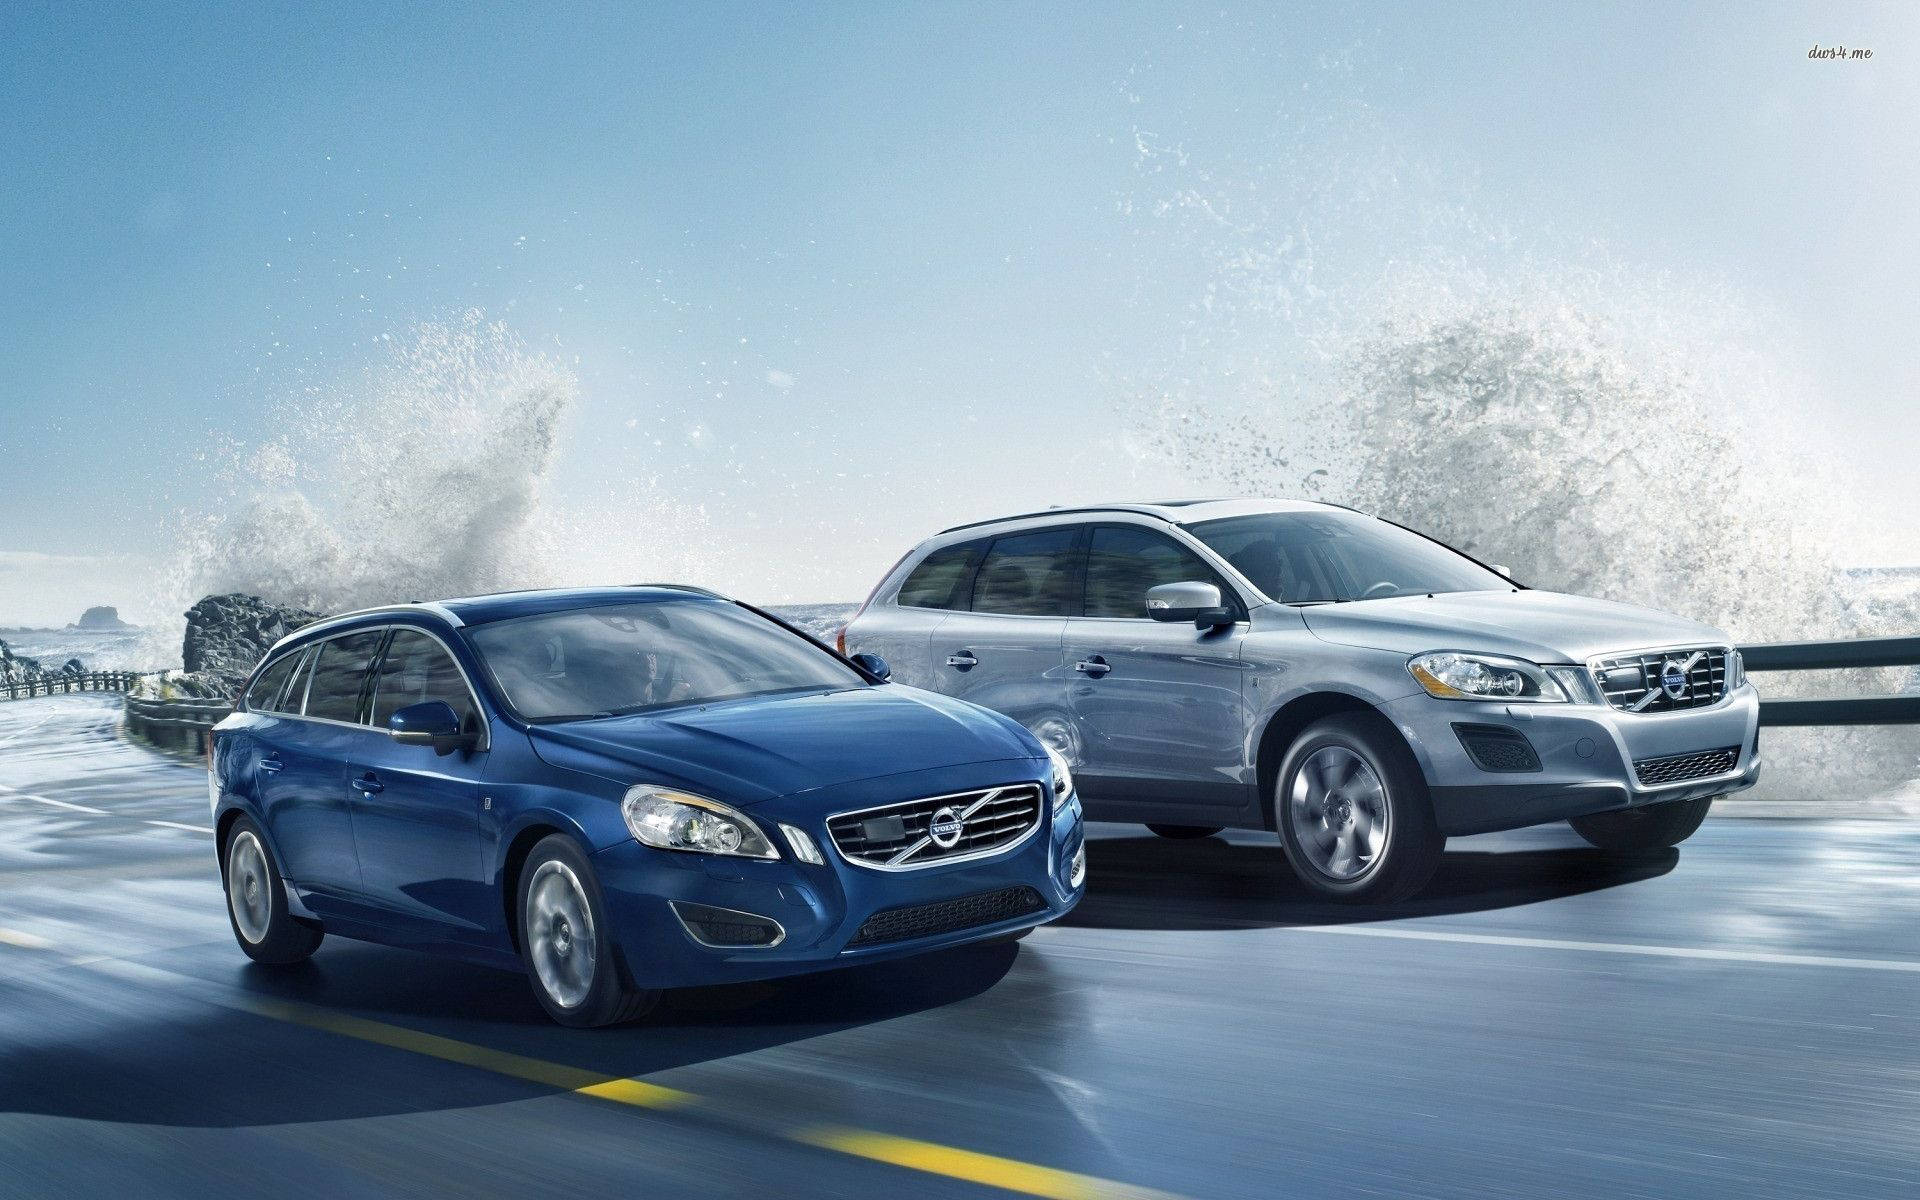 Two Volvo Cars